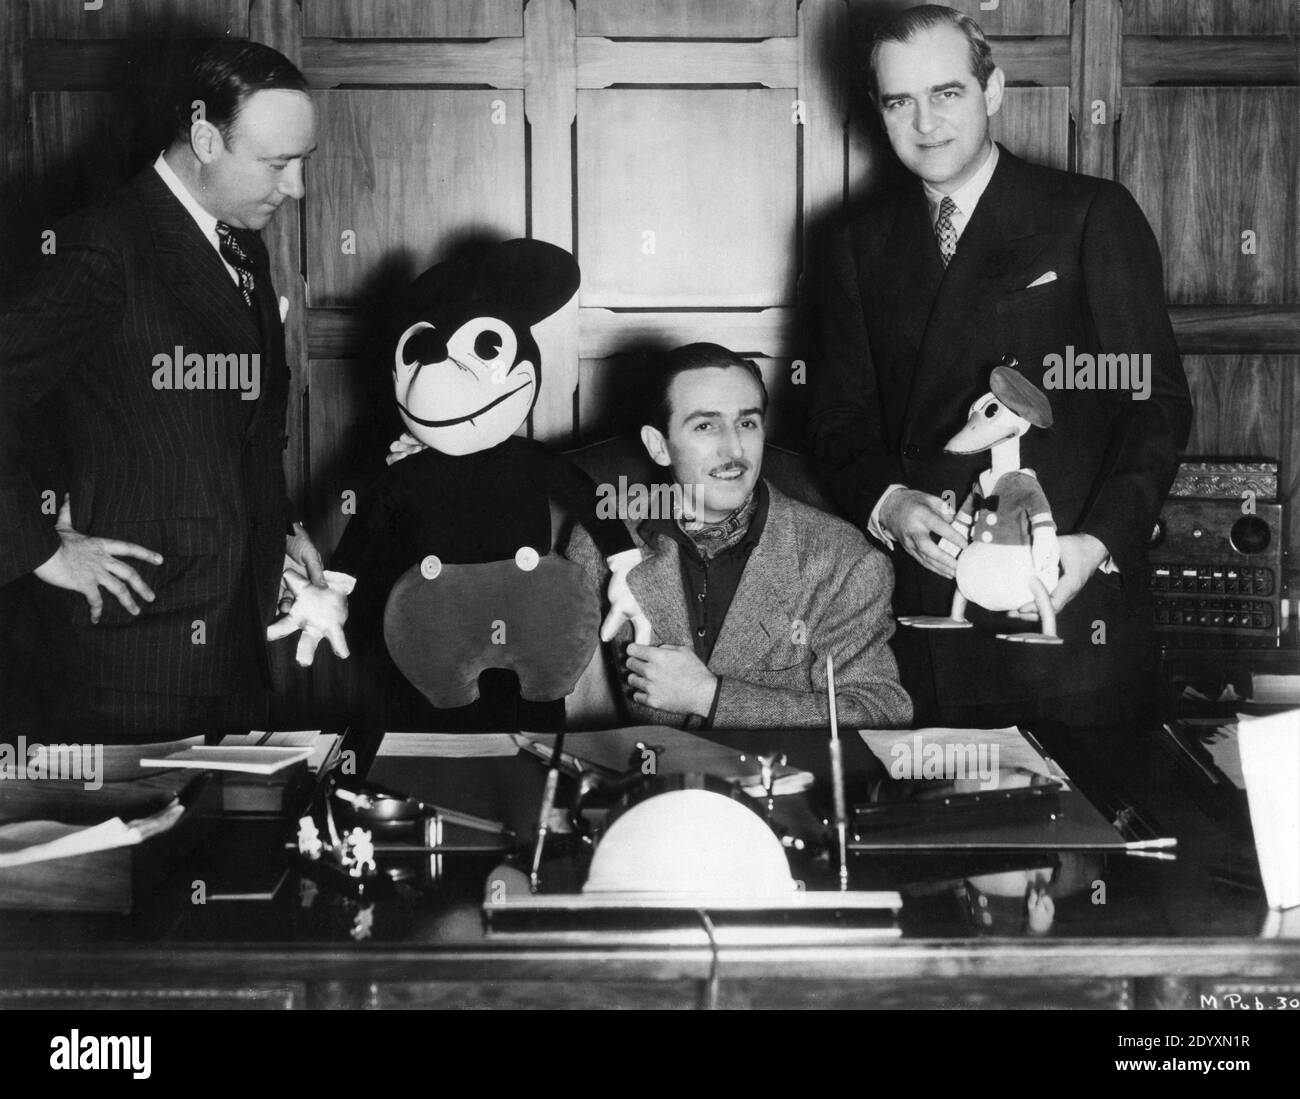 MERLIN H. AYLESWORTH Chairman of the Board of Radio Pictures MICKEY WALT DISNEY with MICKEY MOUSE soft toy and NED DEPINET President of RKO Radio with DONALD DUCK toy at signing of Contract in 1936 making RKO Radio Pictures sole distributer of Disney Cartoons and Silly Symphonies beginning 1936 - 37 publicity for Walt Disney Productions / RKO Radio Pictures Stock Photo